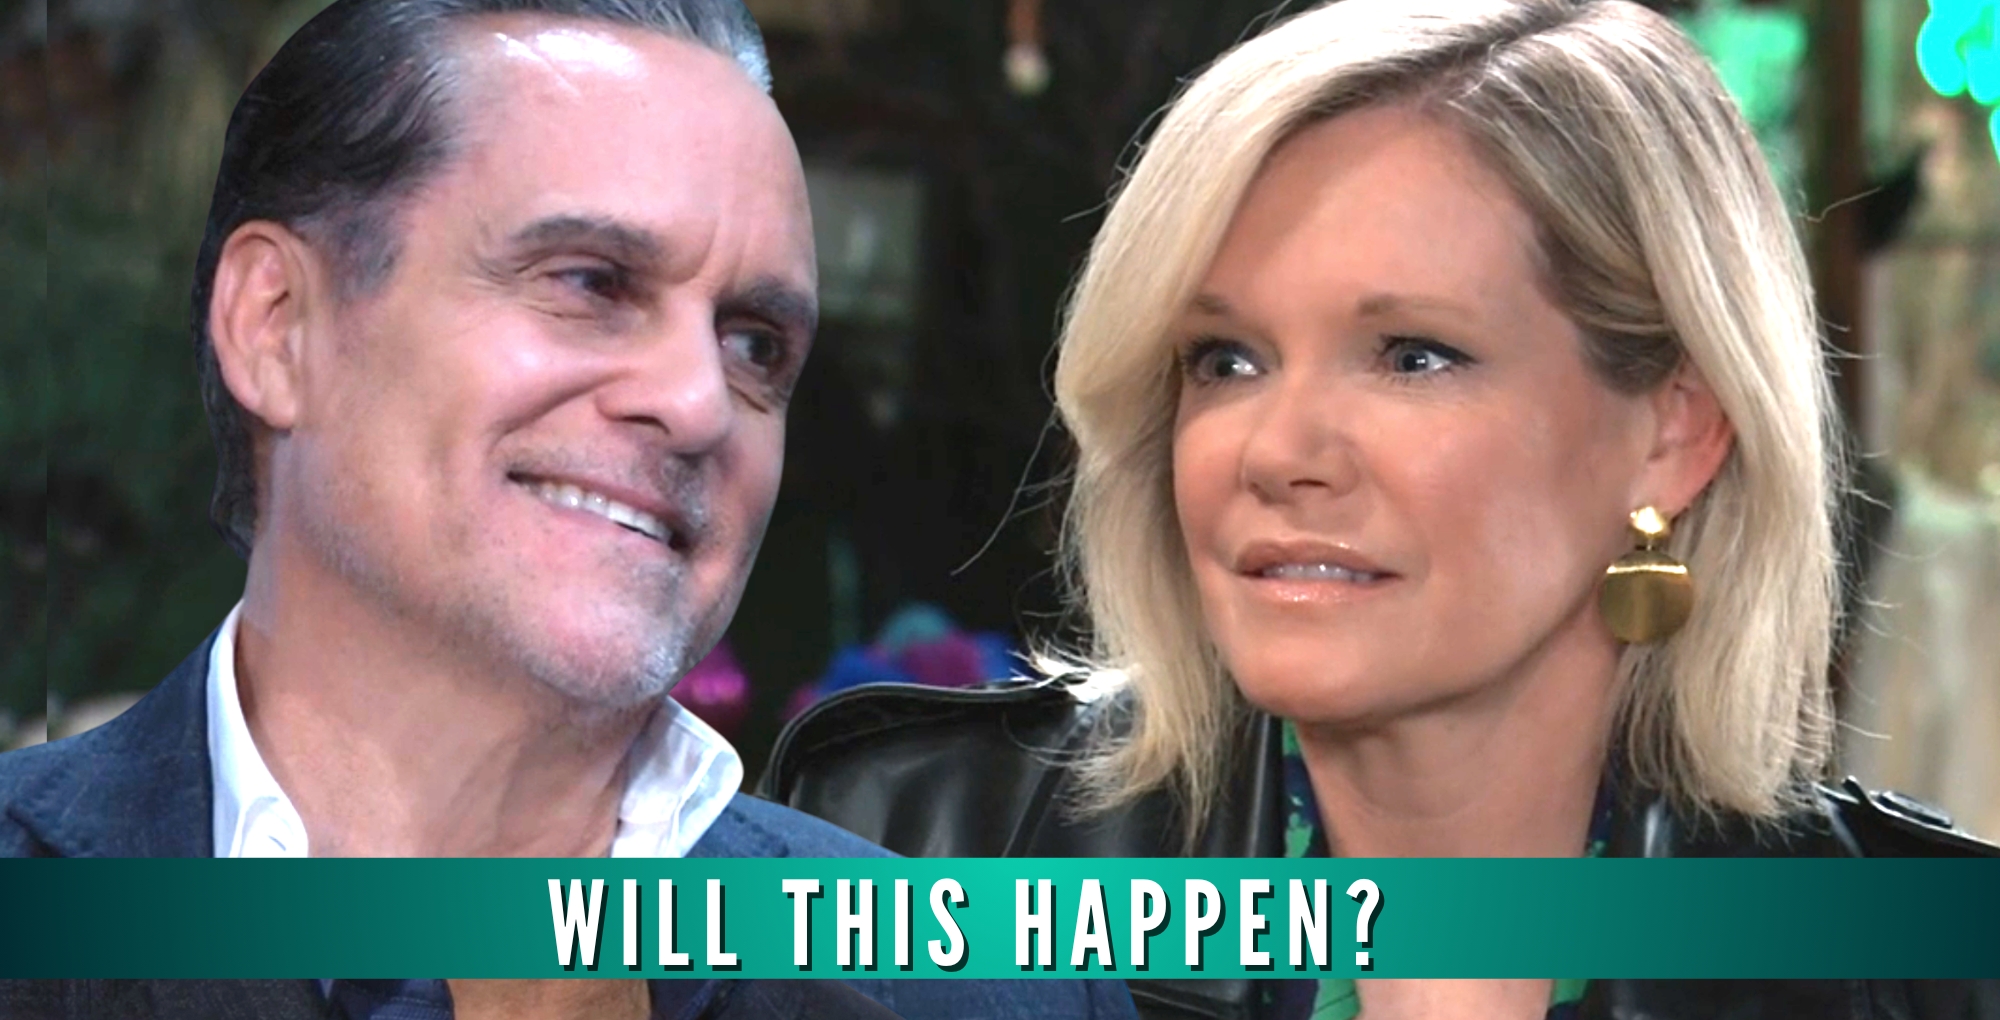 sonny and ava of general hospital smiling at each other.